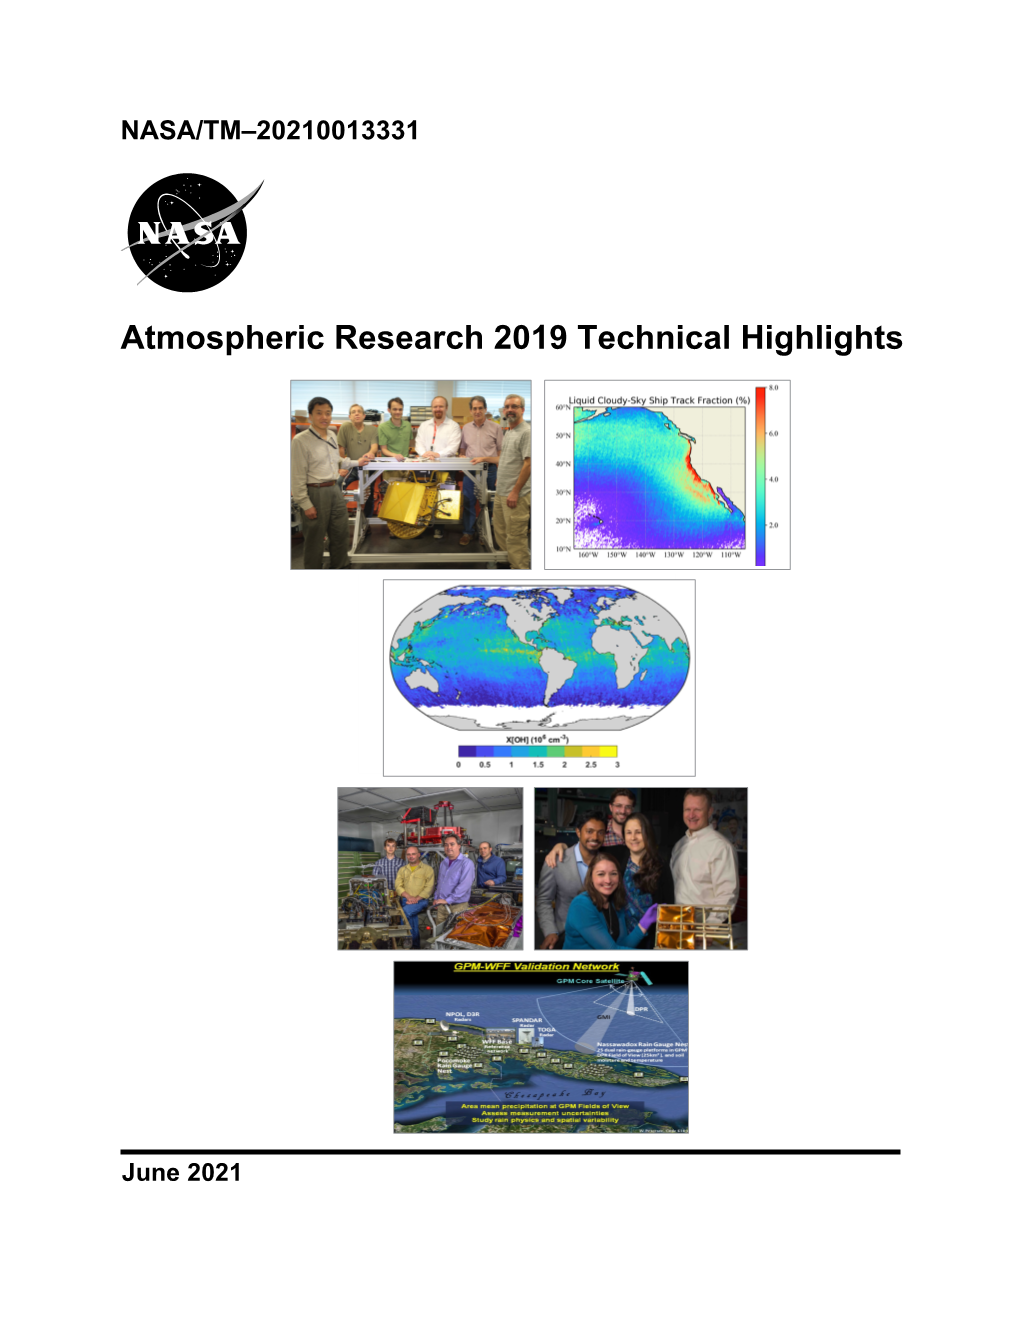 Atmospheric Research 2019 Technical Highlights